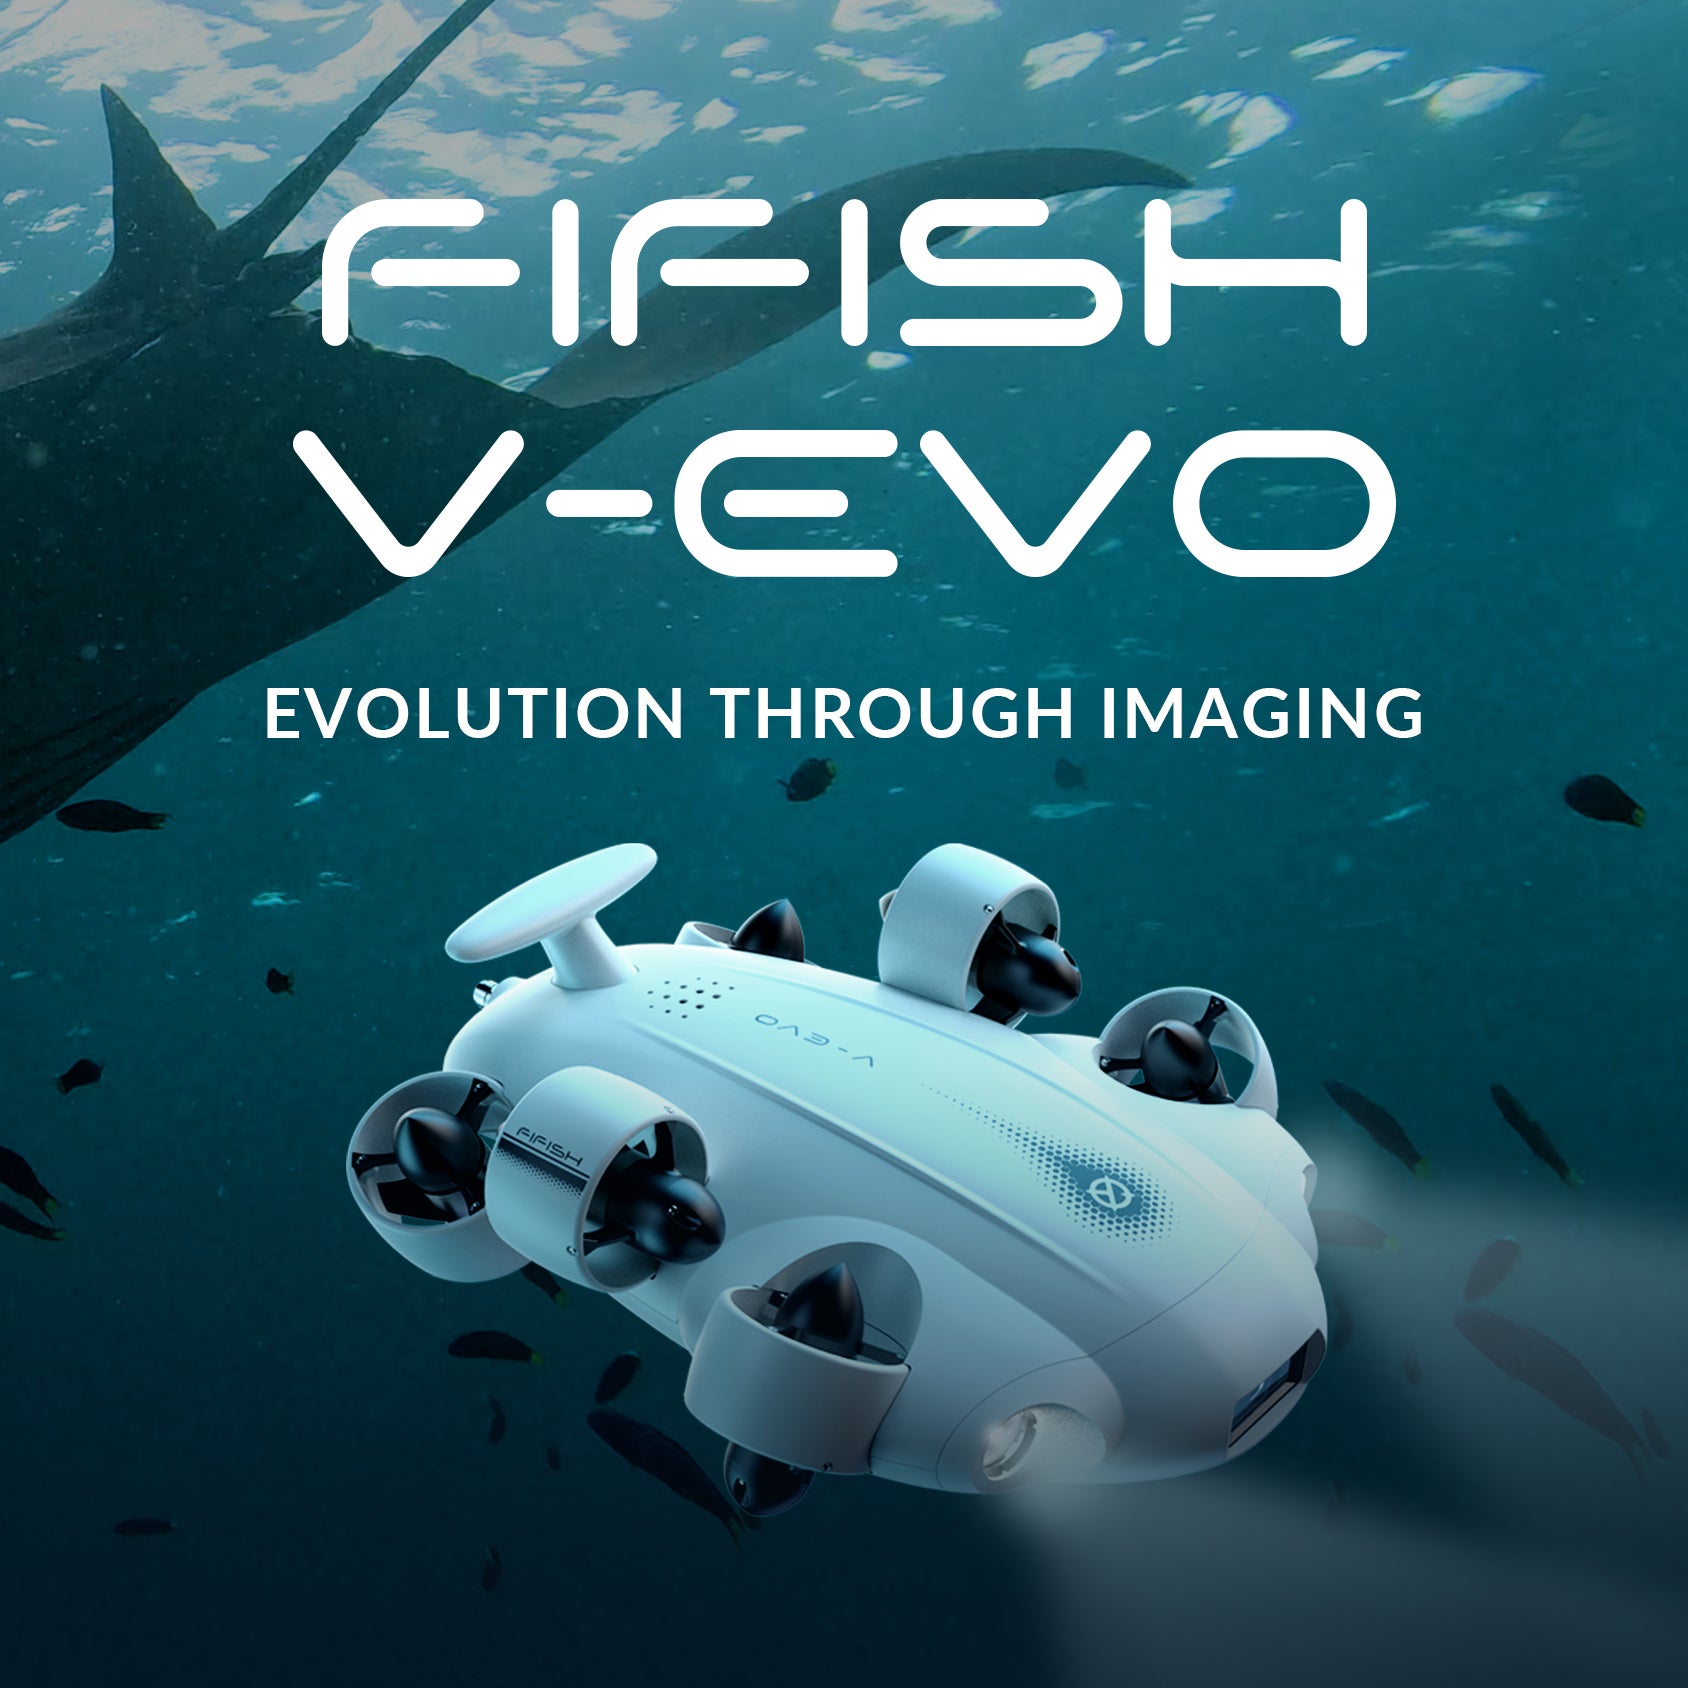 QYSEA FIFISH V-EVO, an underwater ROV delivers 4K UHD video shooting at 60 frames per second, along with an ultra-wide 166-degree field of view, can move & film with absolute freedom underwater